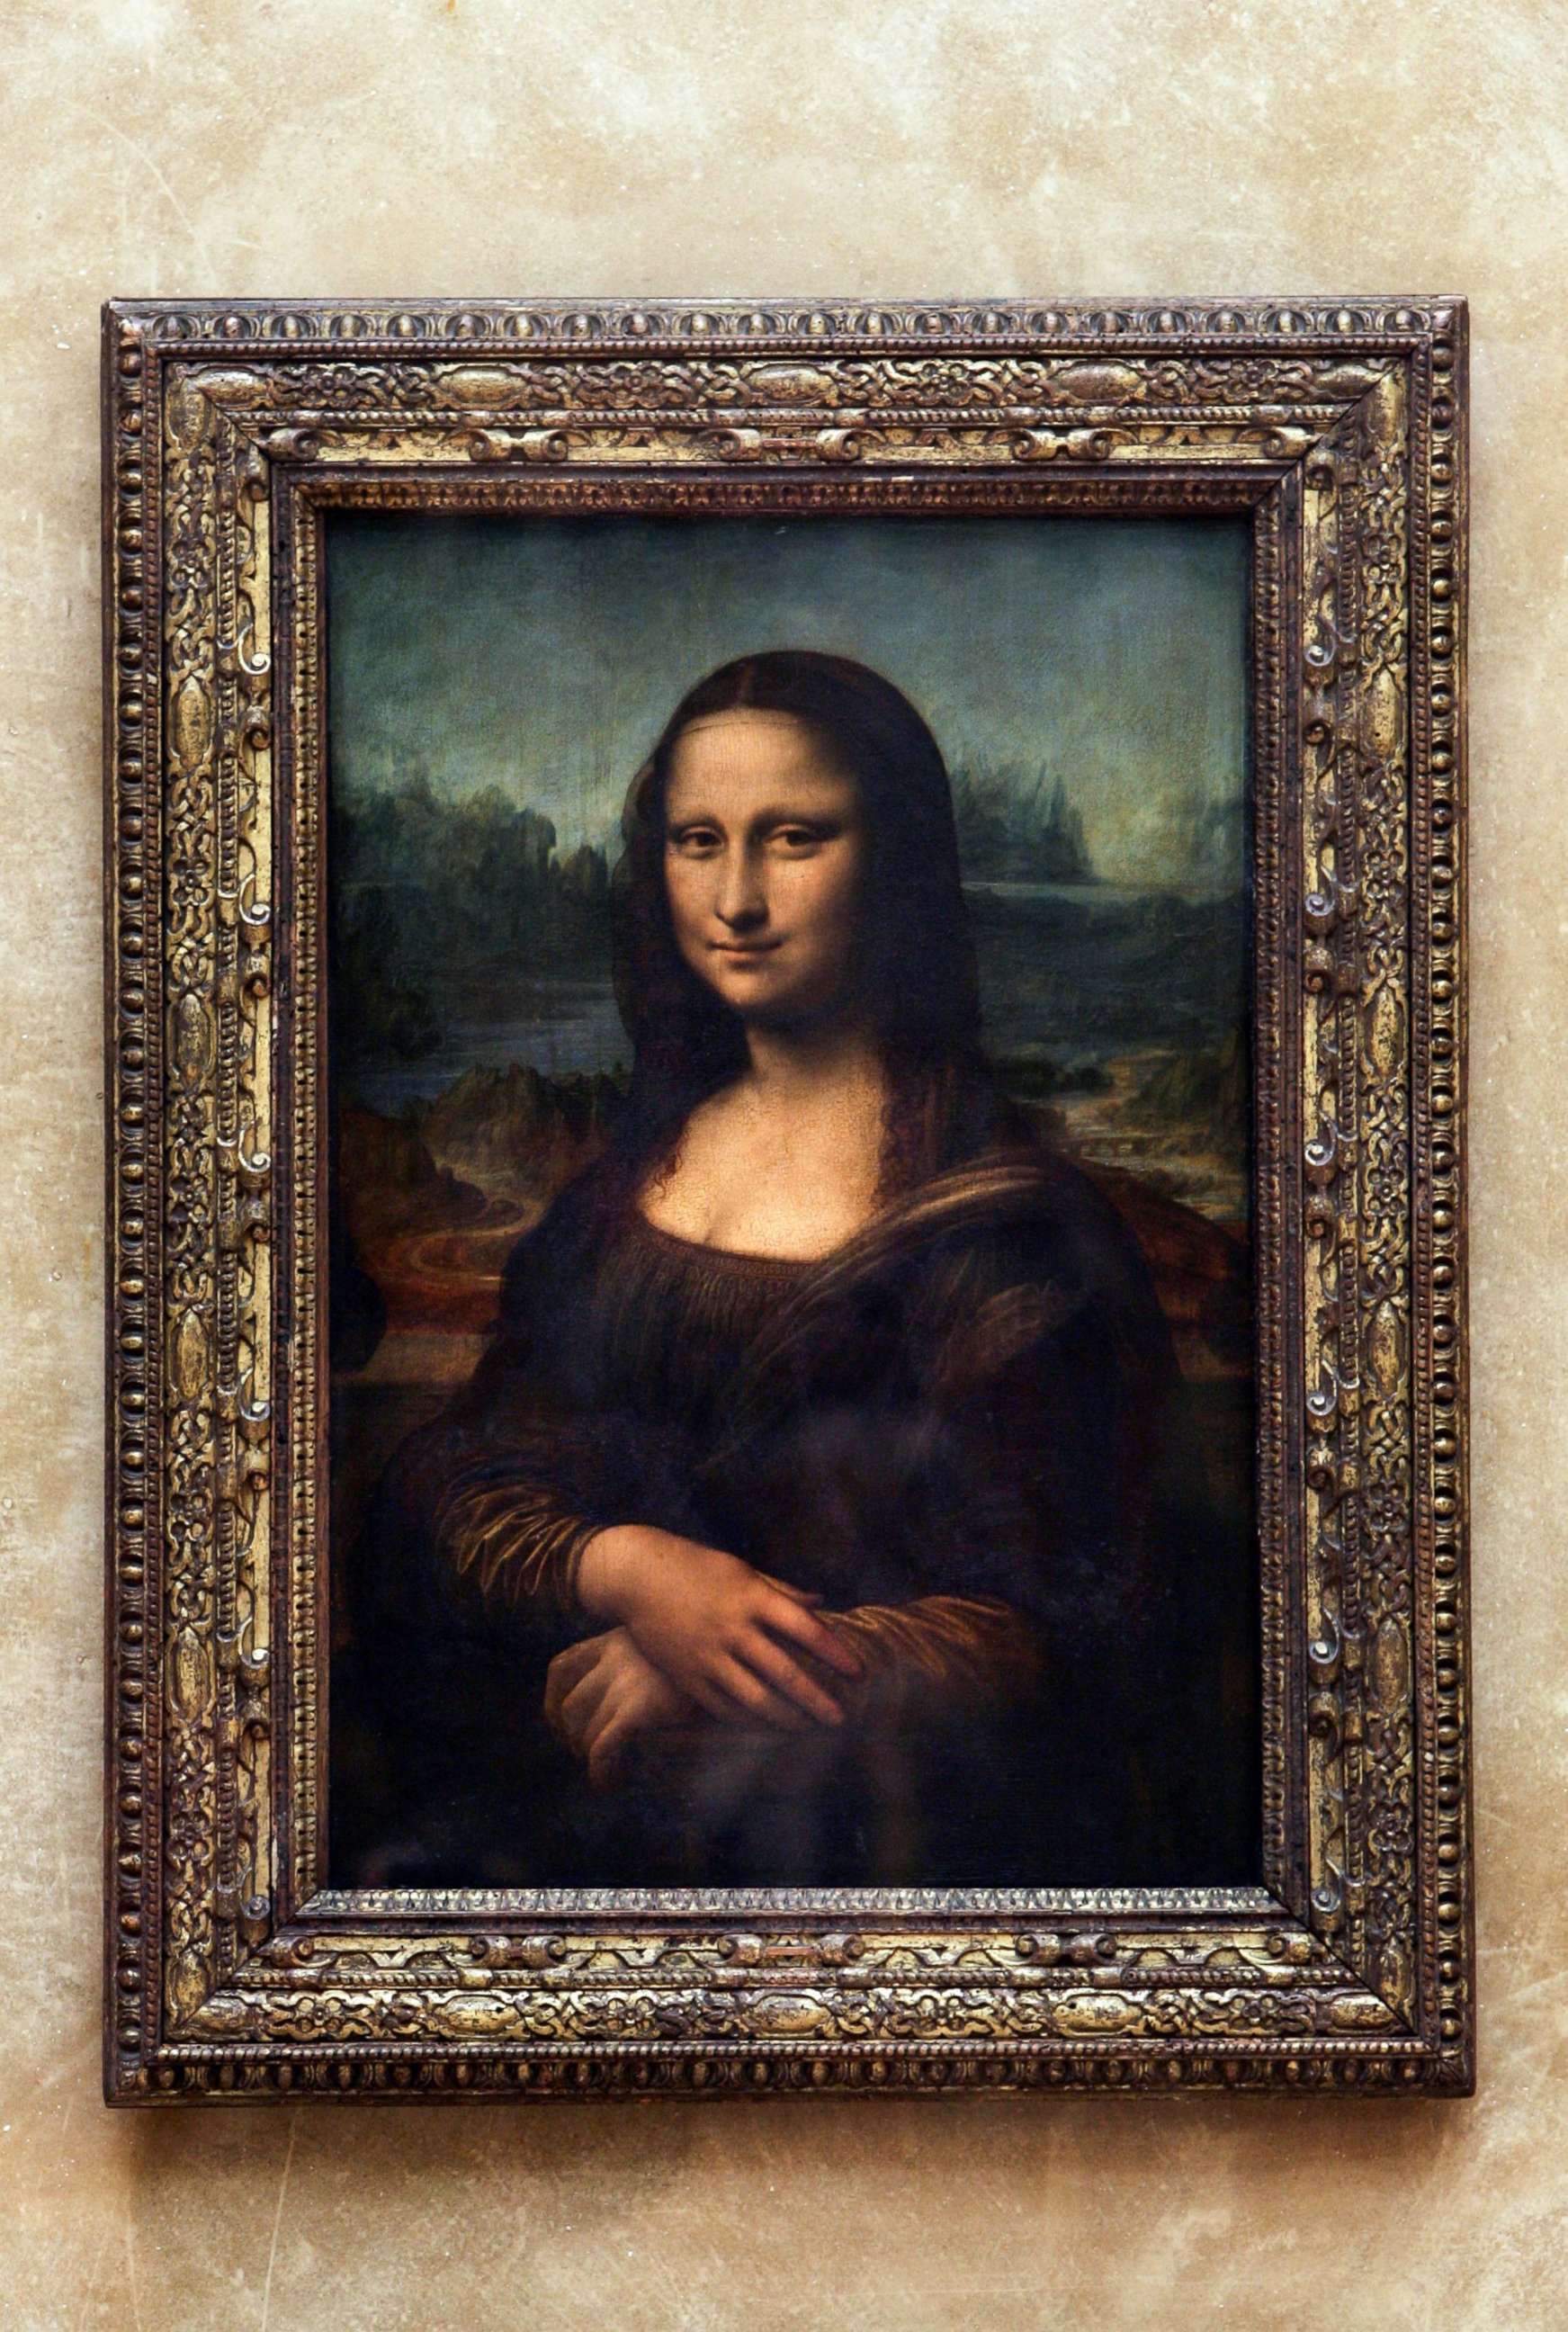 PHOTO: In this file photo taken on April 5, 2005, the famous painting by Italian artist Leonardo da Vinci, the Joconde "Mona Lisa," is on display in the Salle des Etats room at the Louvre museum in Paris.